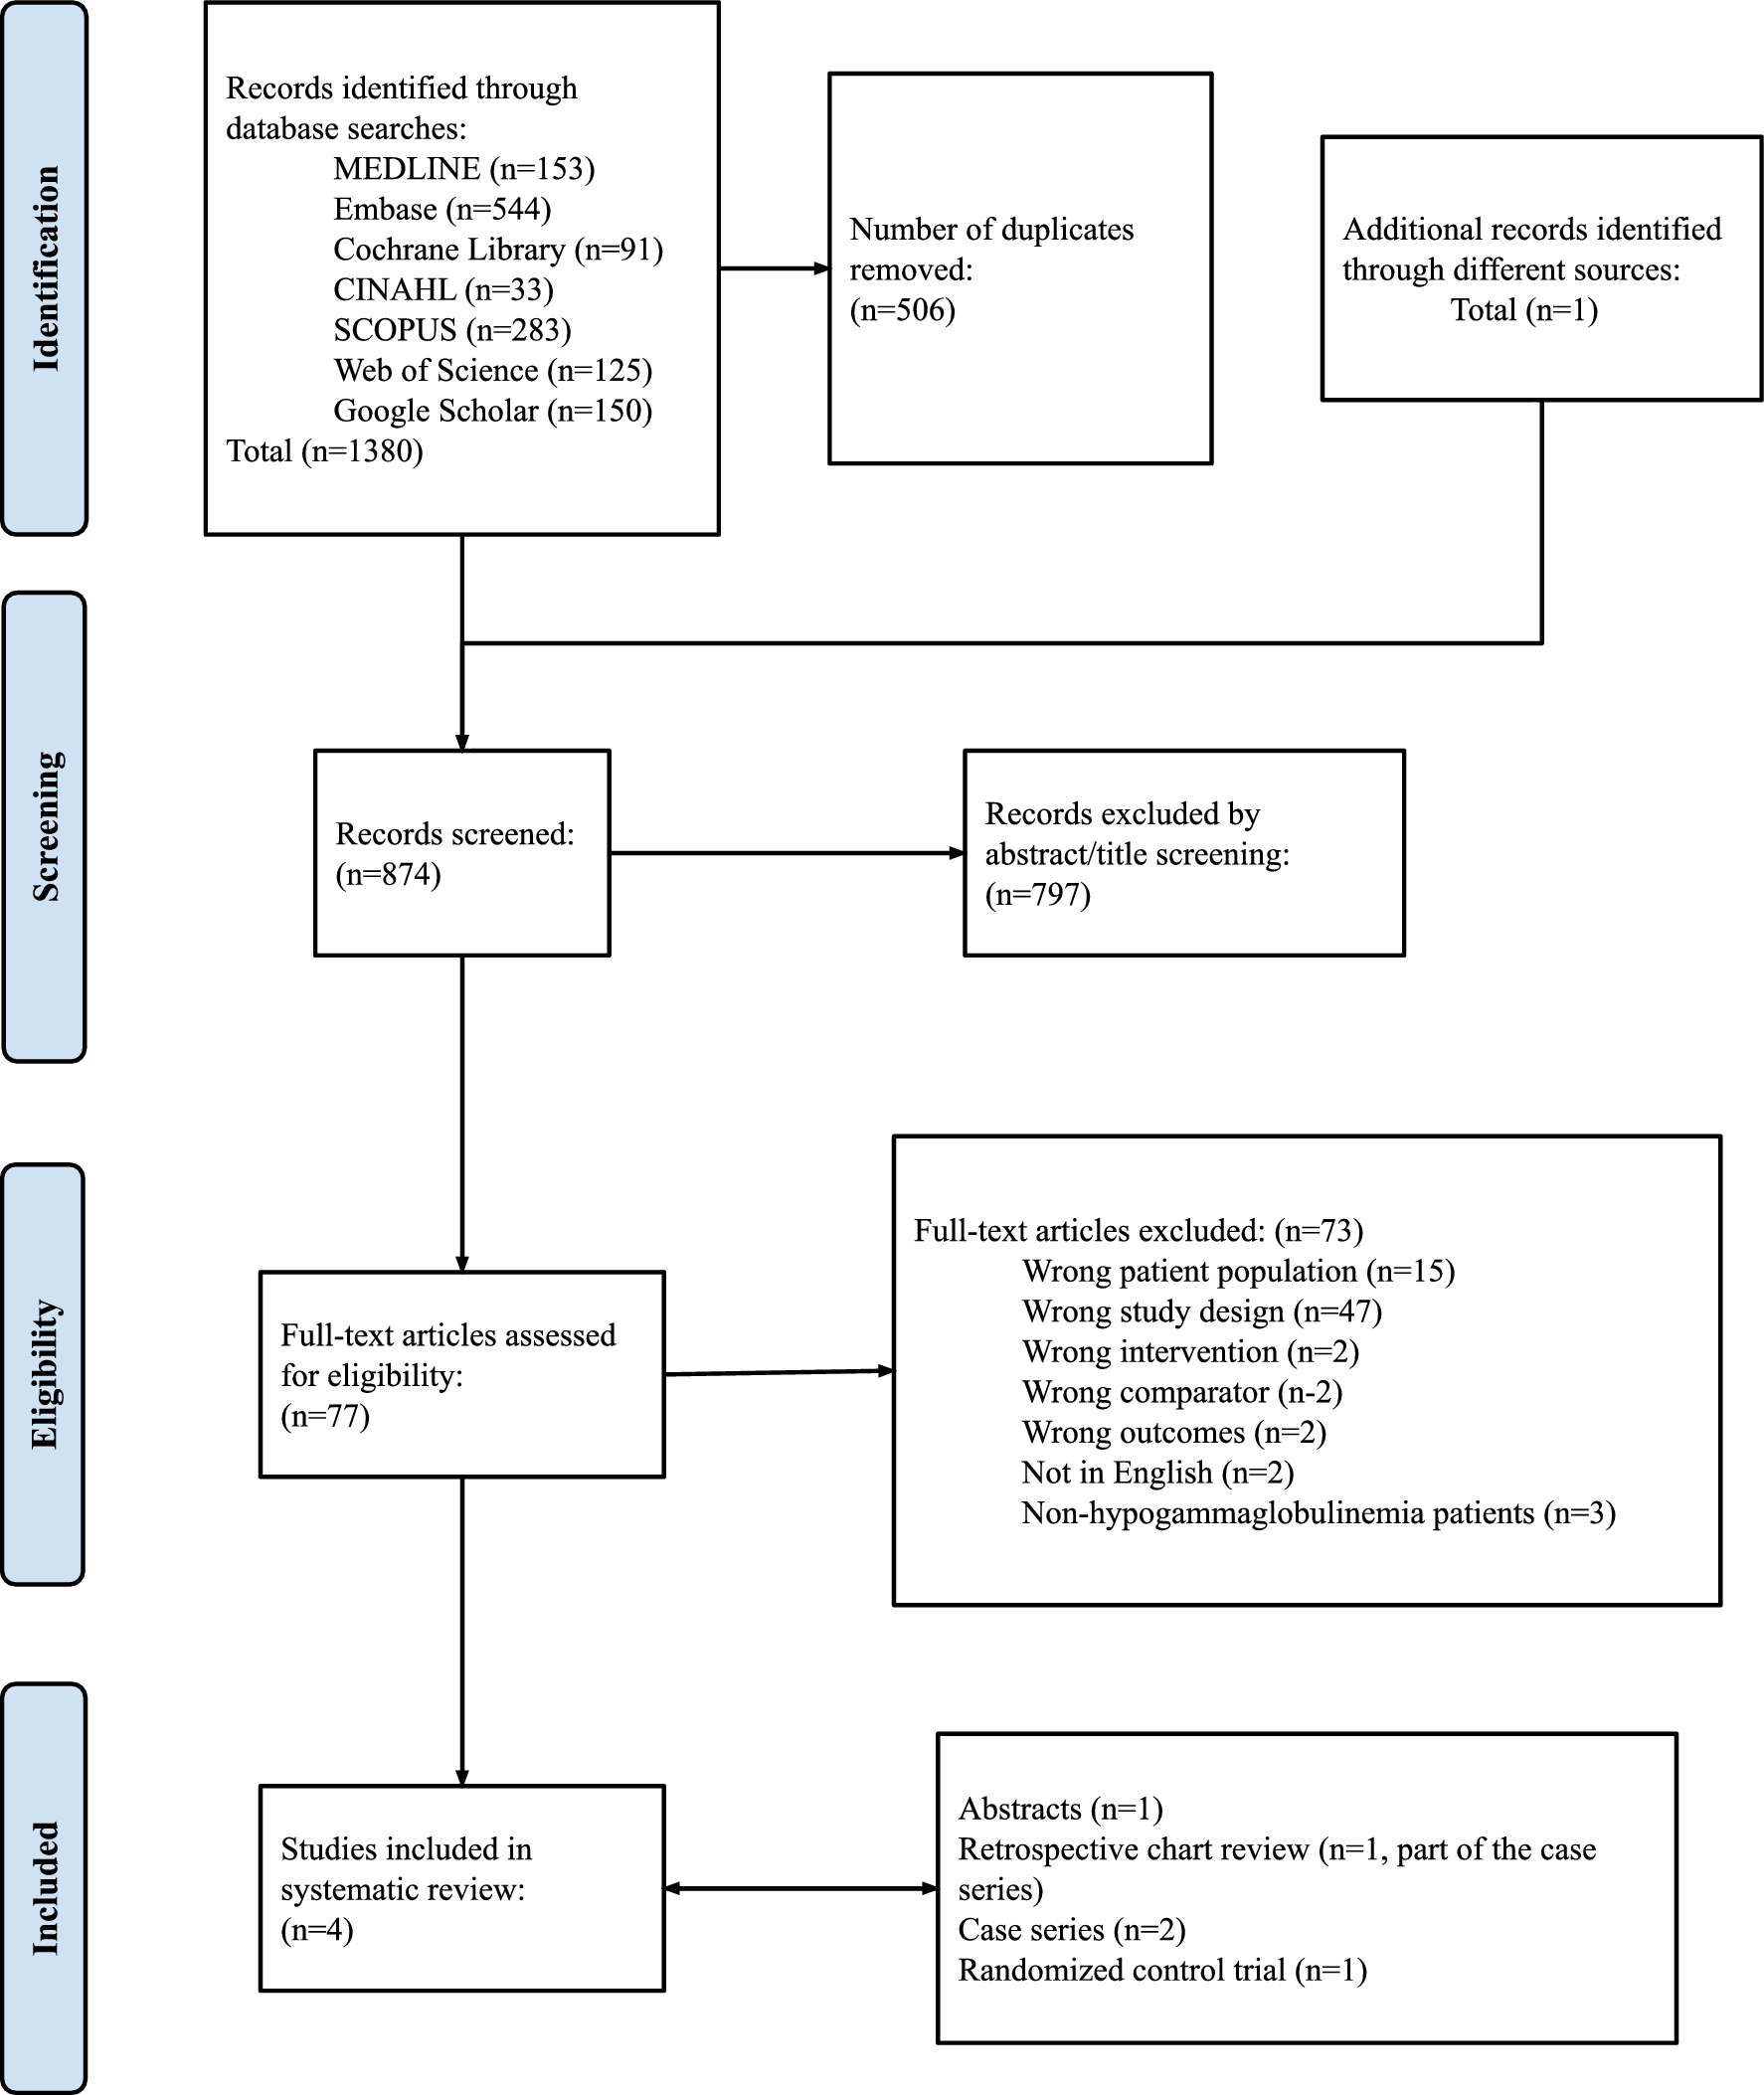 Effectiveness of immunoglobulin replacement therapy in preventing infections in patients with chronic obstructive pulmonary disease: a systematic review